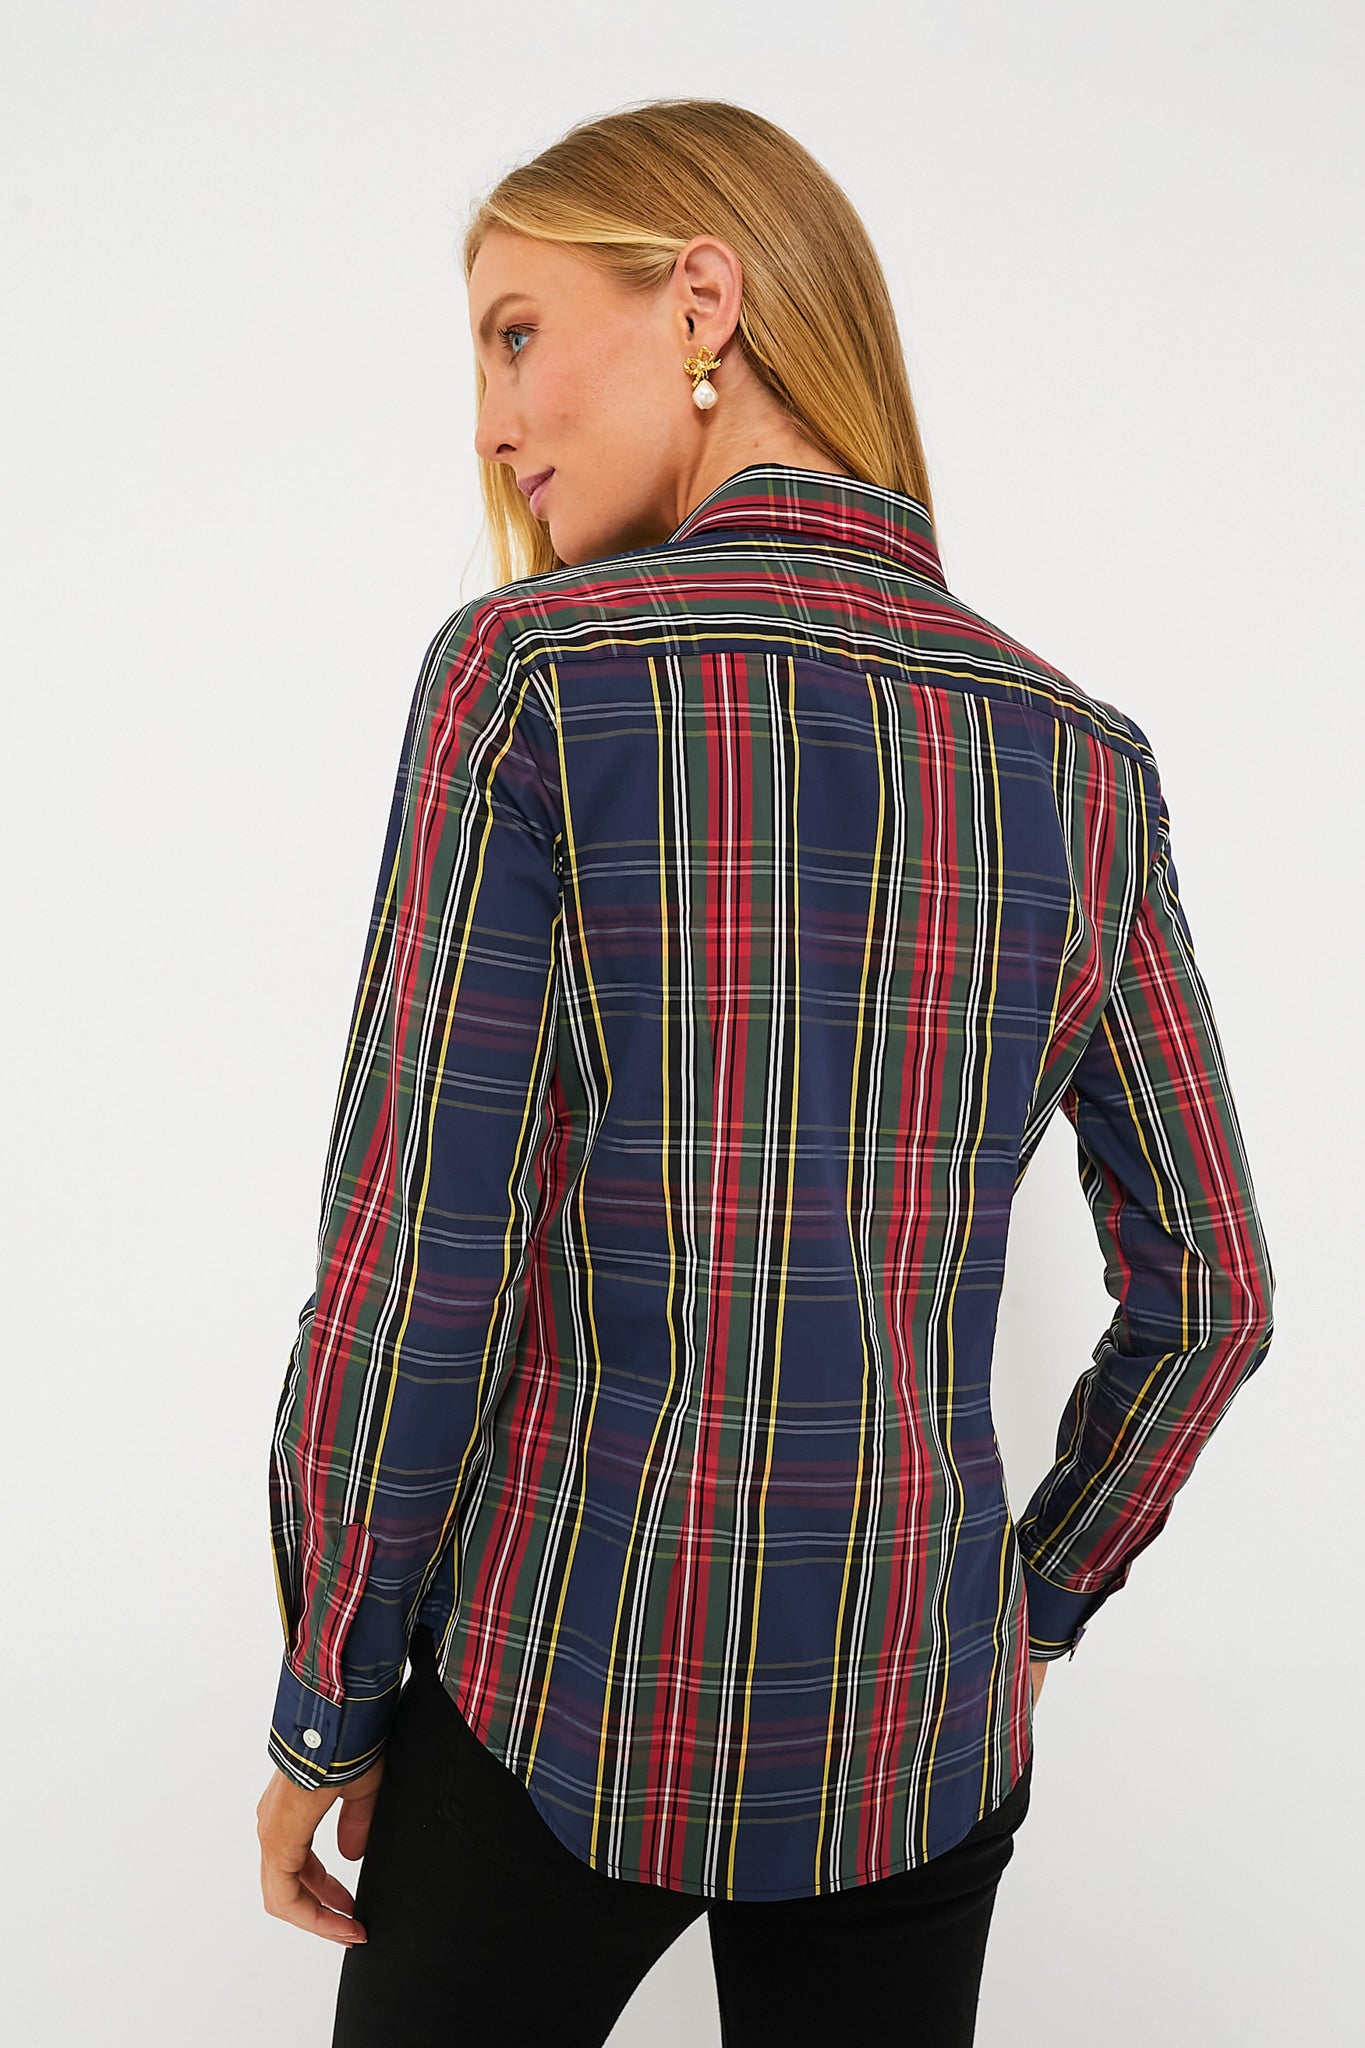 The Shirt by Rochelle Behrens Red Plaid Icon Shirt Size XS